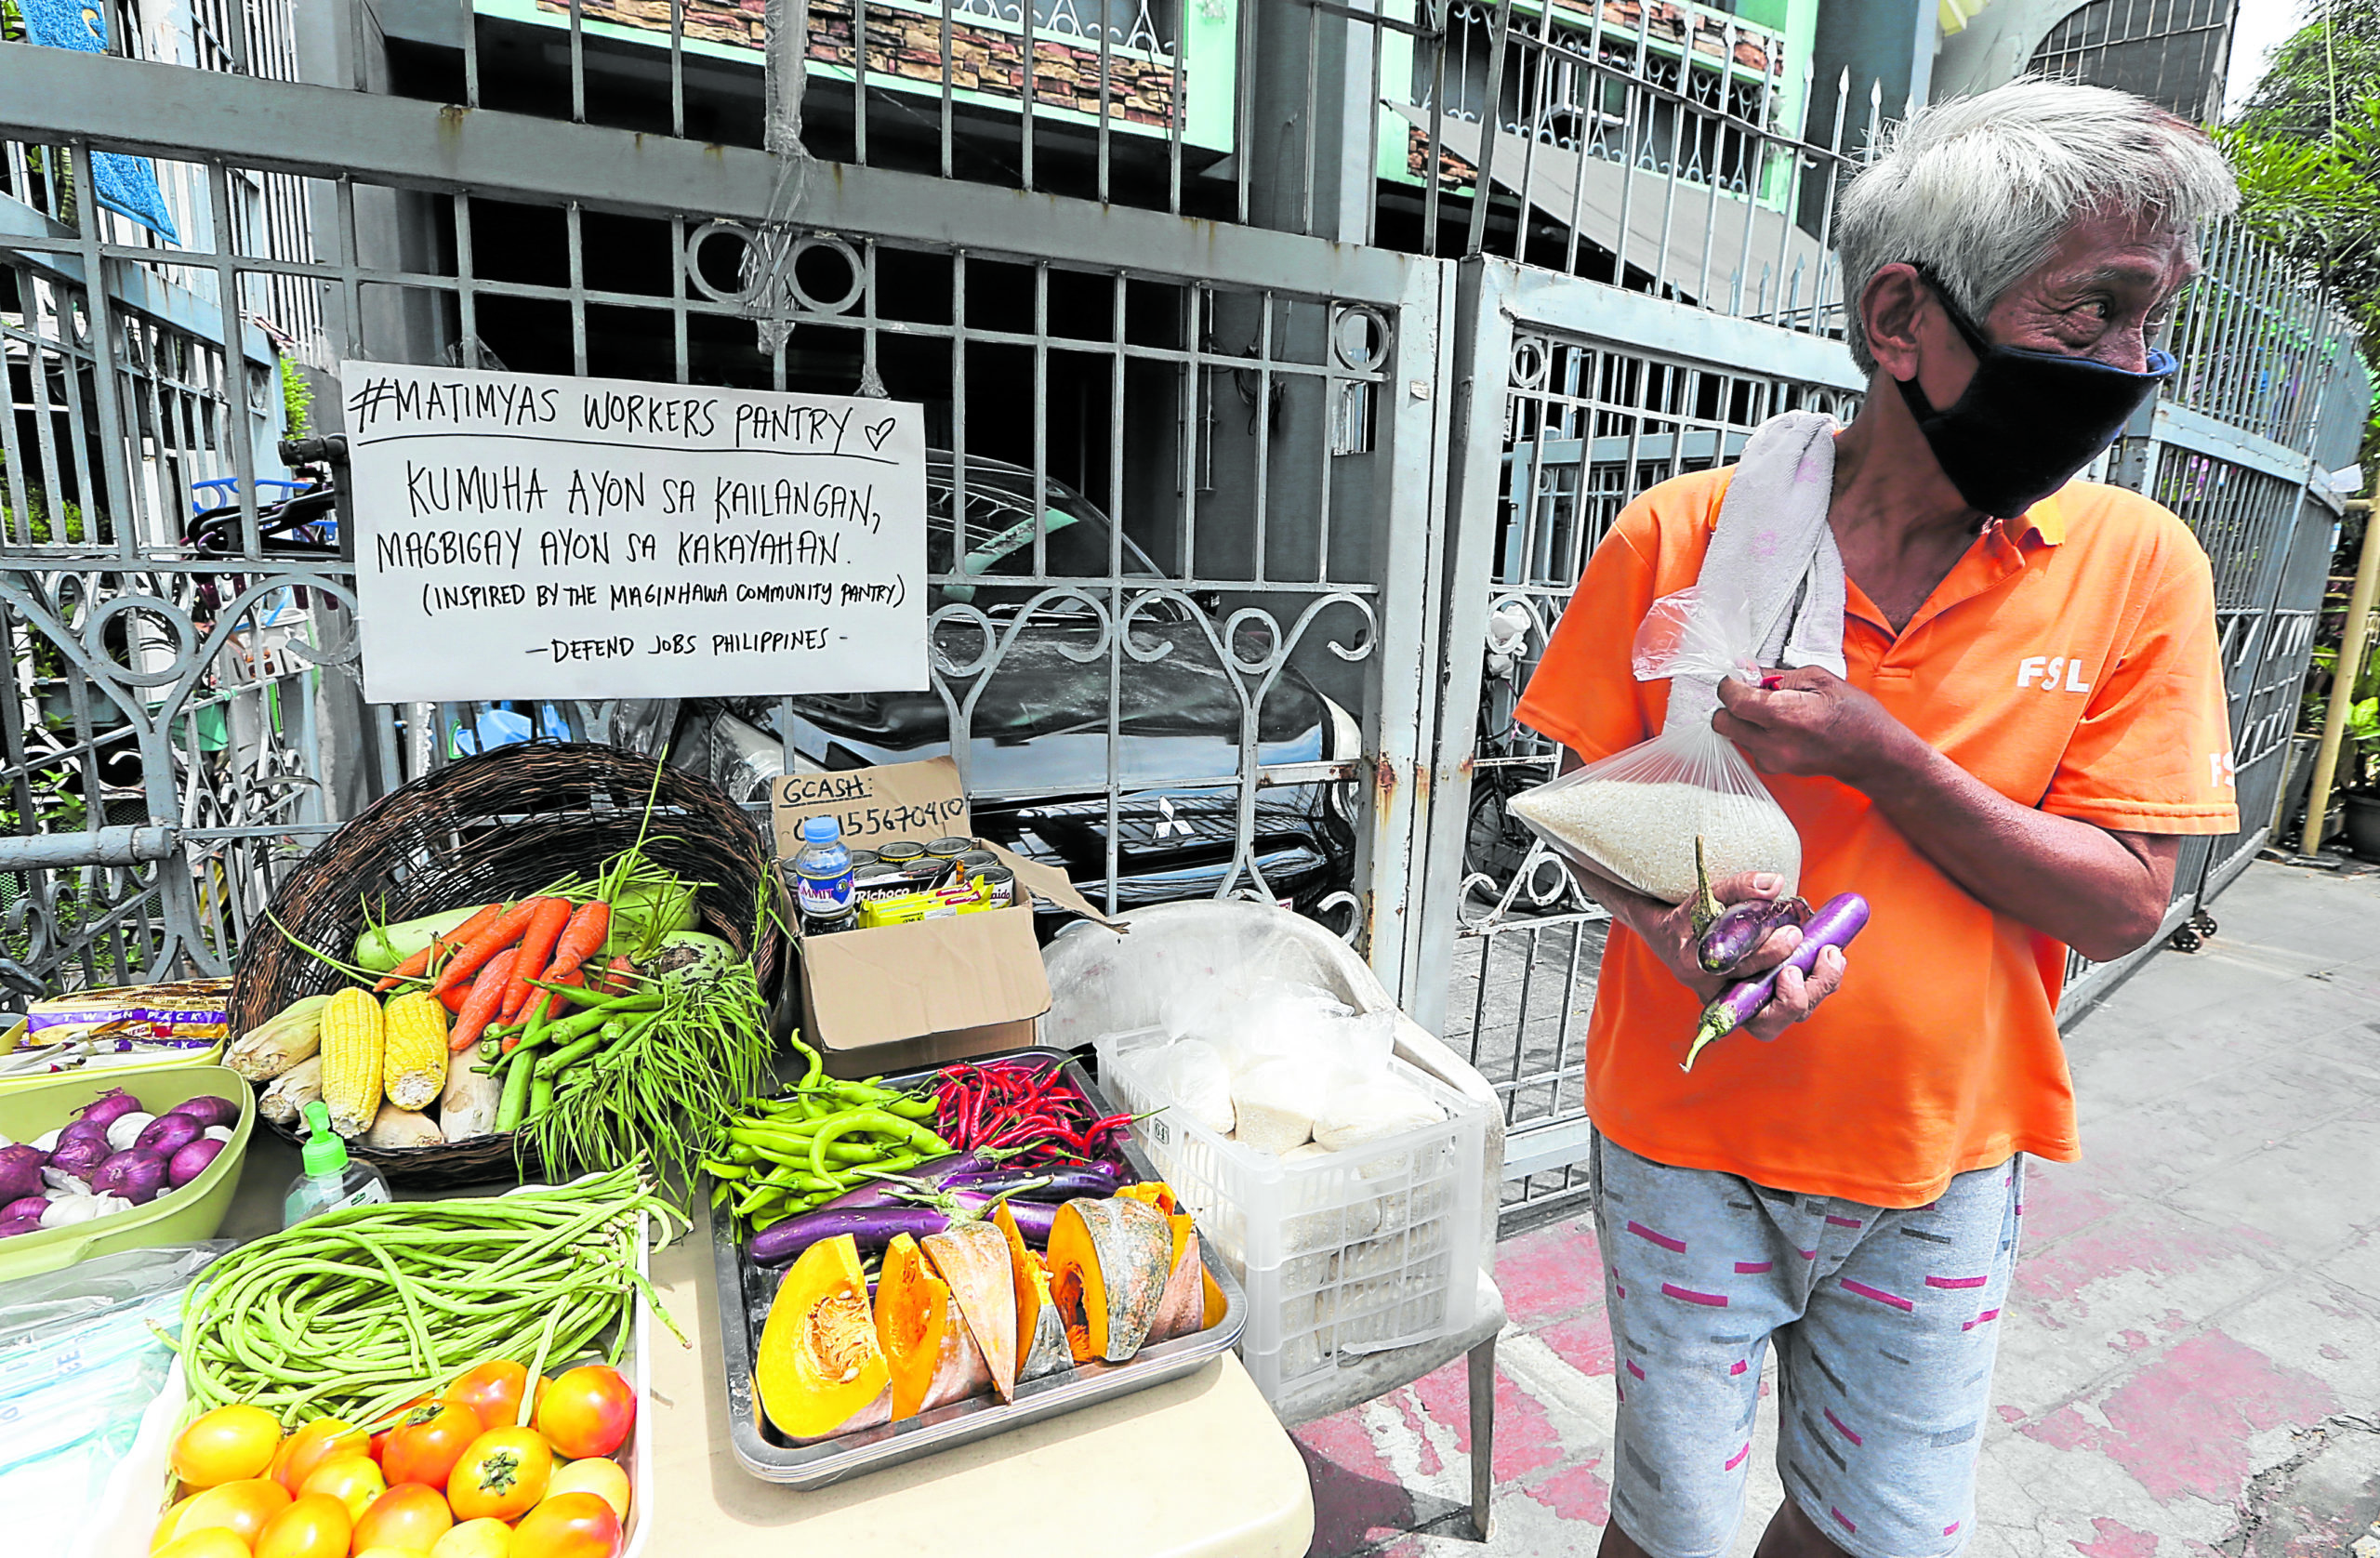 House probe on 'profiling, red-tagging' of community pantry organizers sought